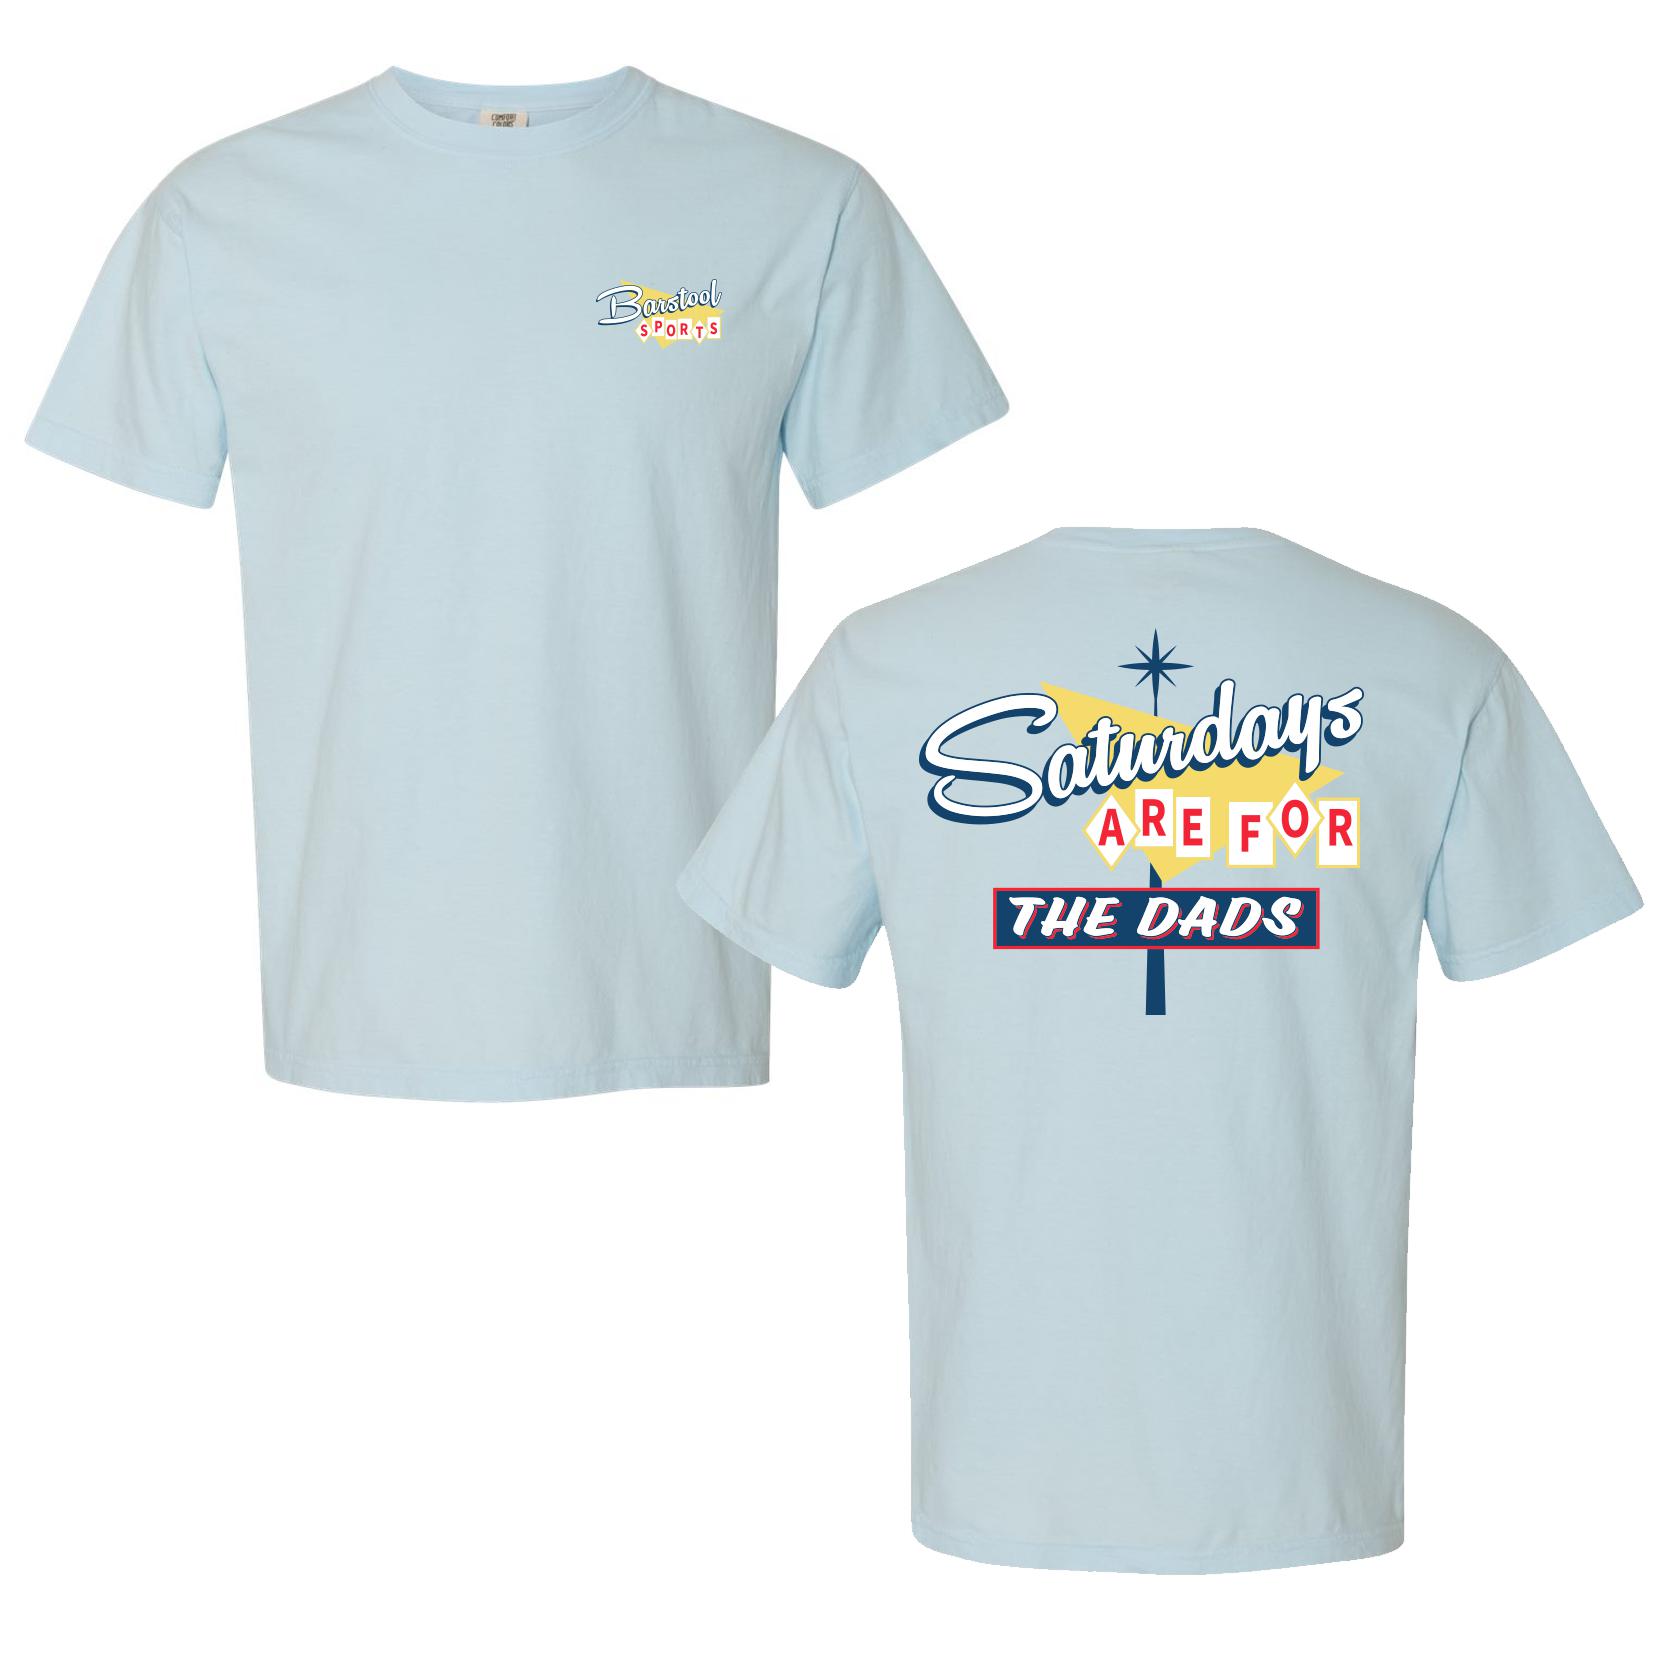 Saturdays Are For The Dads Retro Sign Tee-T-Shirts-SAFTB-Light Blue-S-Barstool Sports